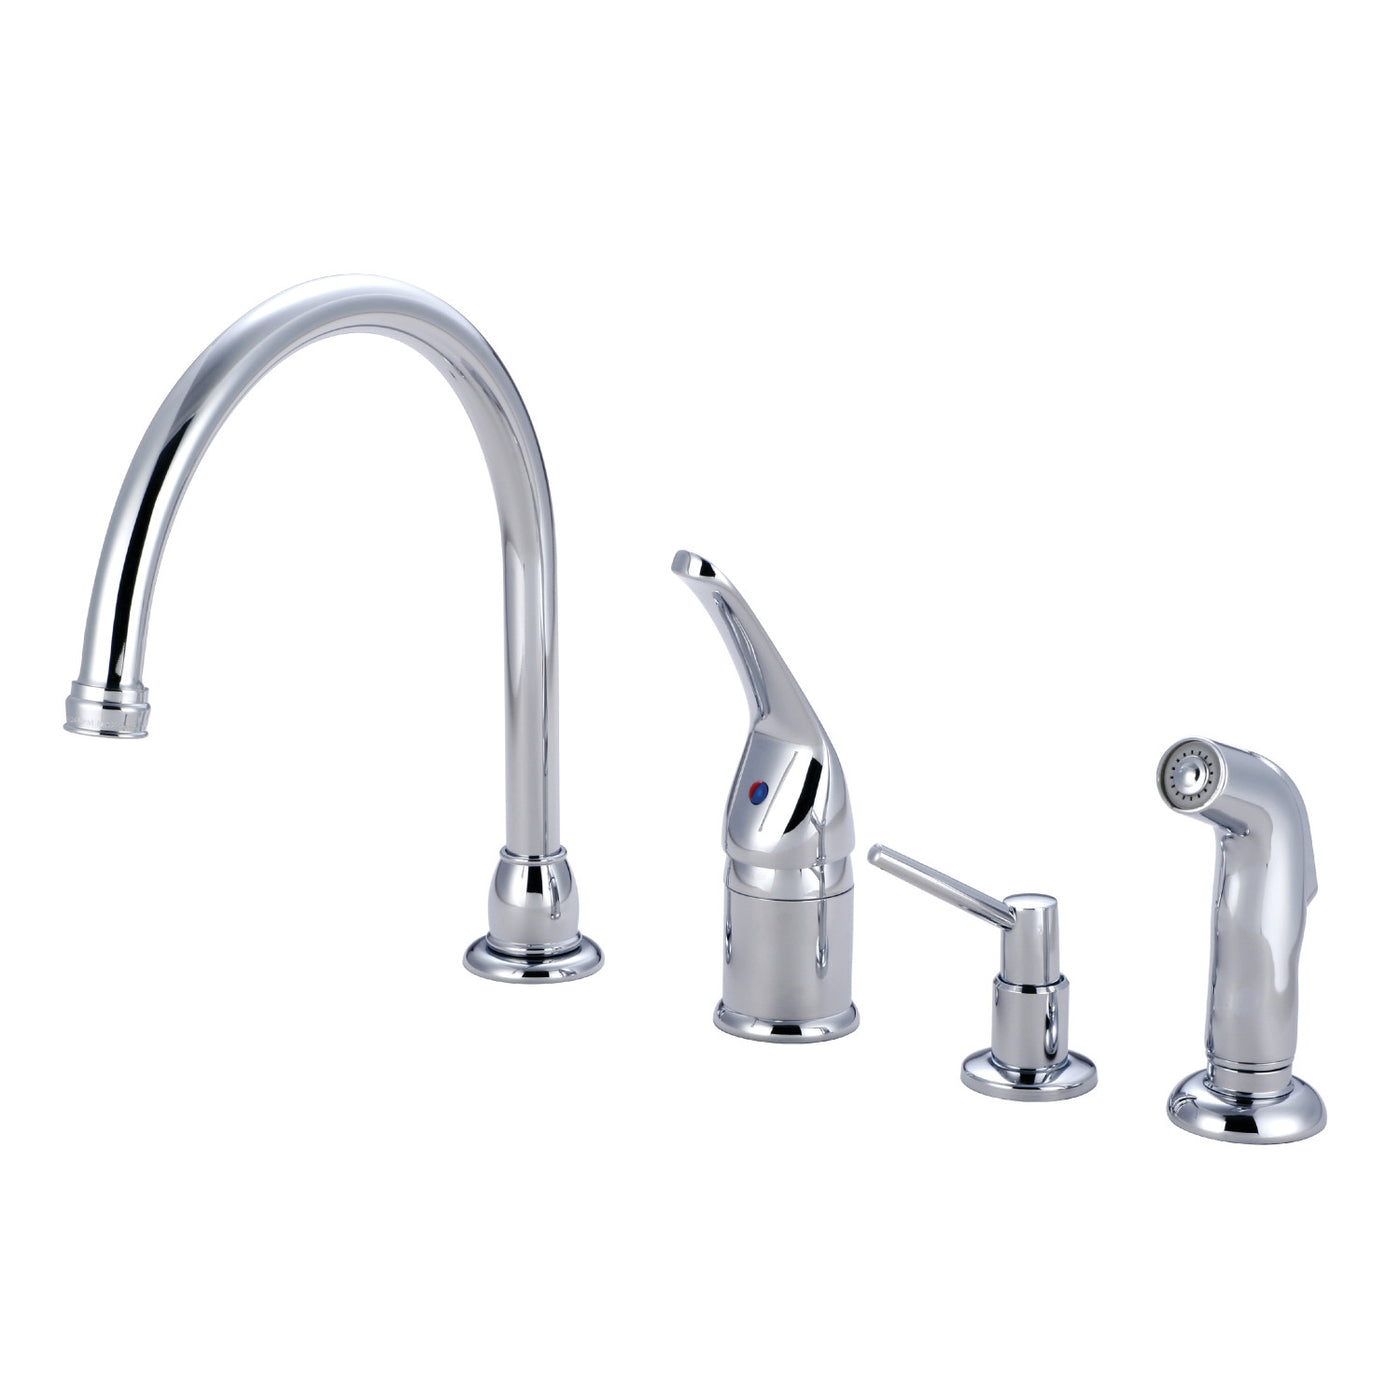 Elements of Design EB821K1 Single-Handle Widespread Kitchen Faucet Combo, Polished Chrome